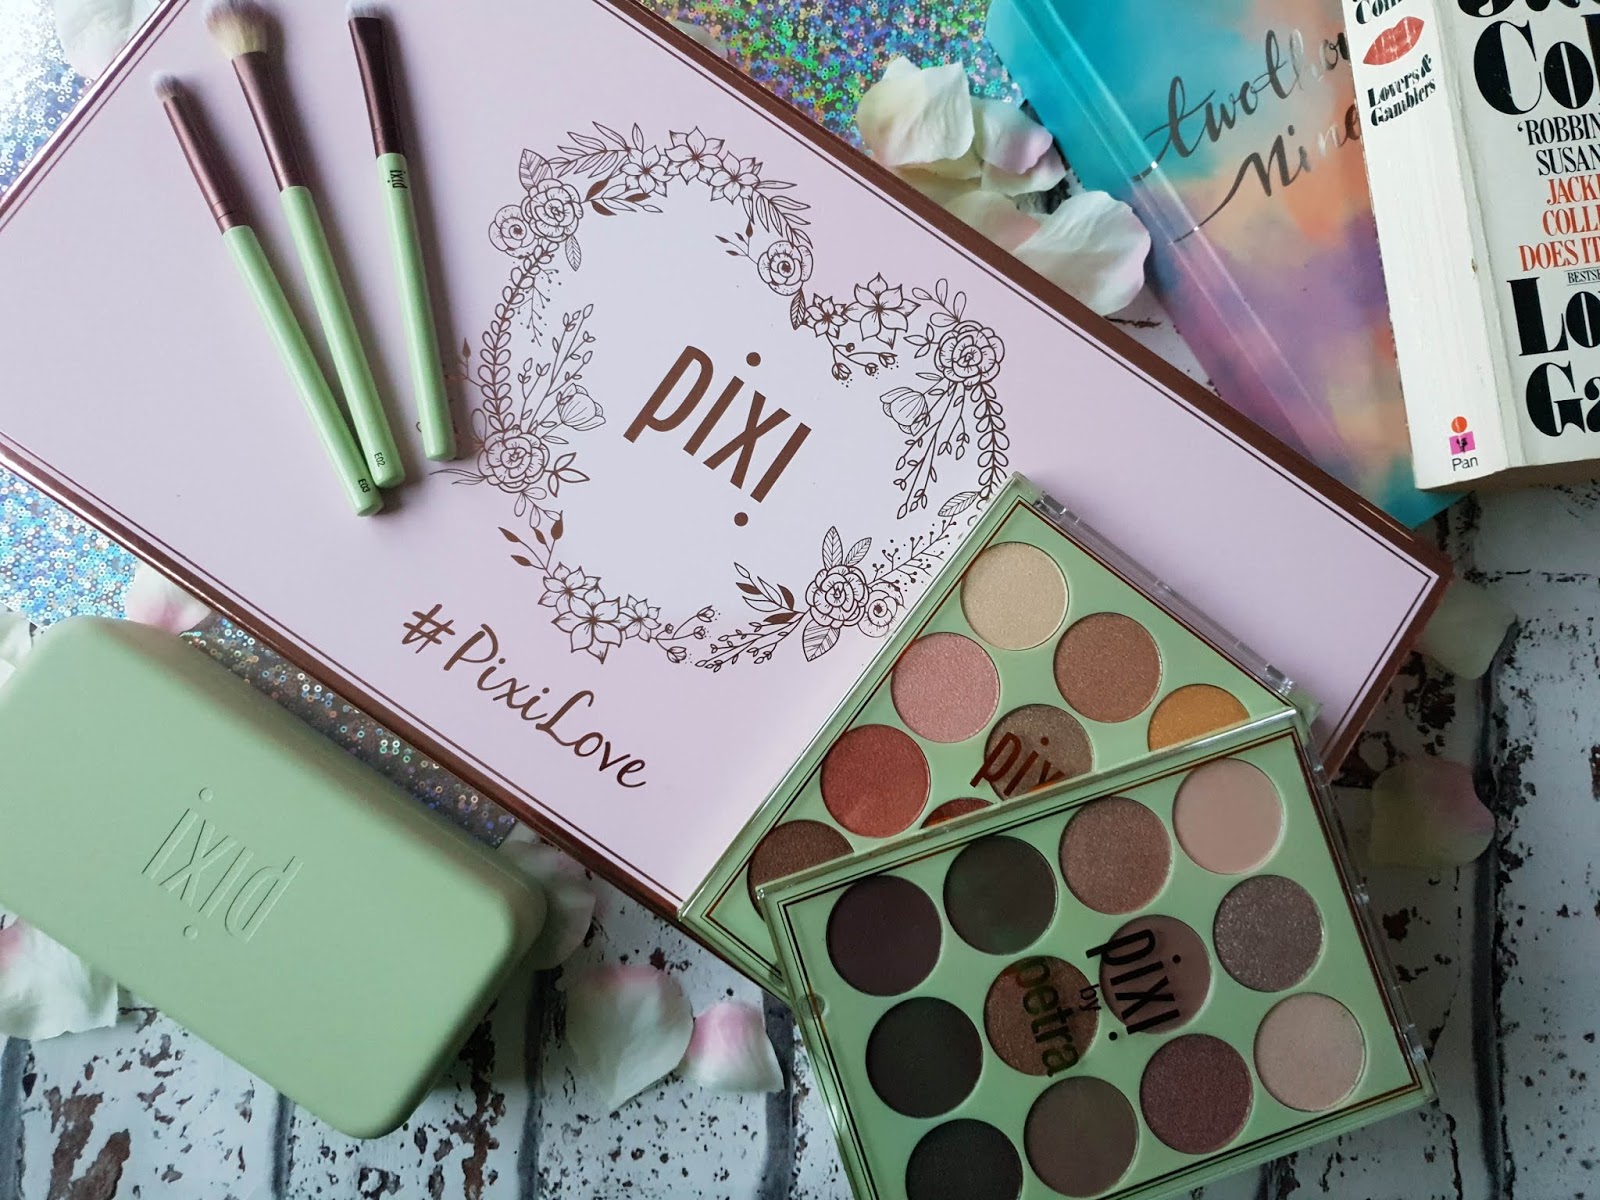 Pixi Beauty Eye Reflections Shadow Palettes | Review